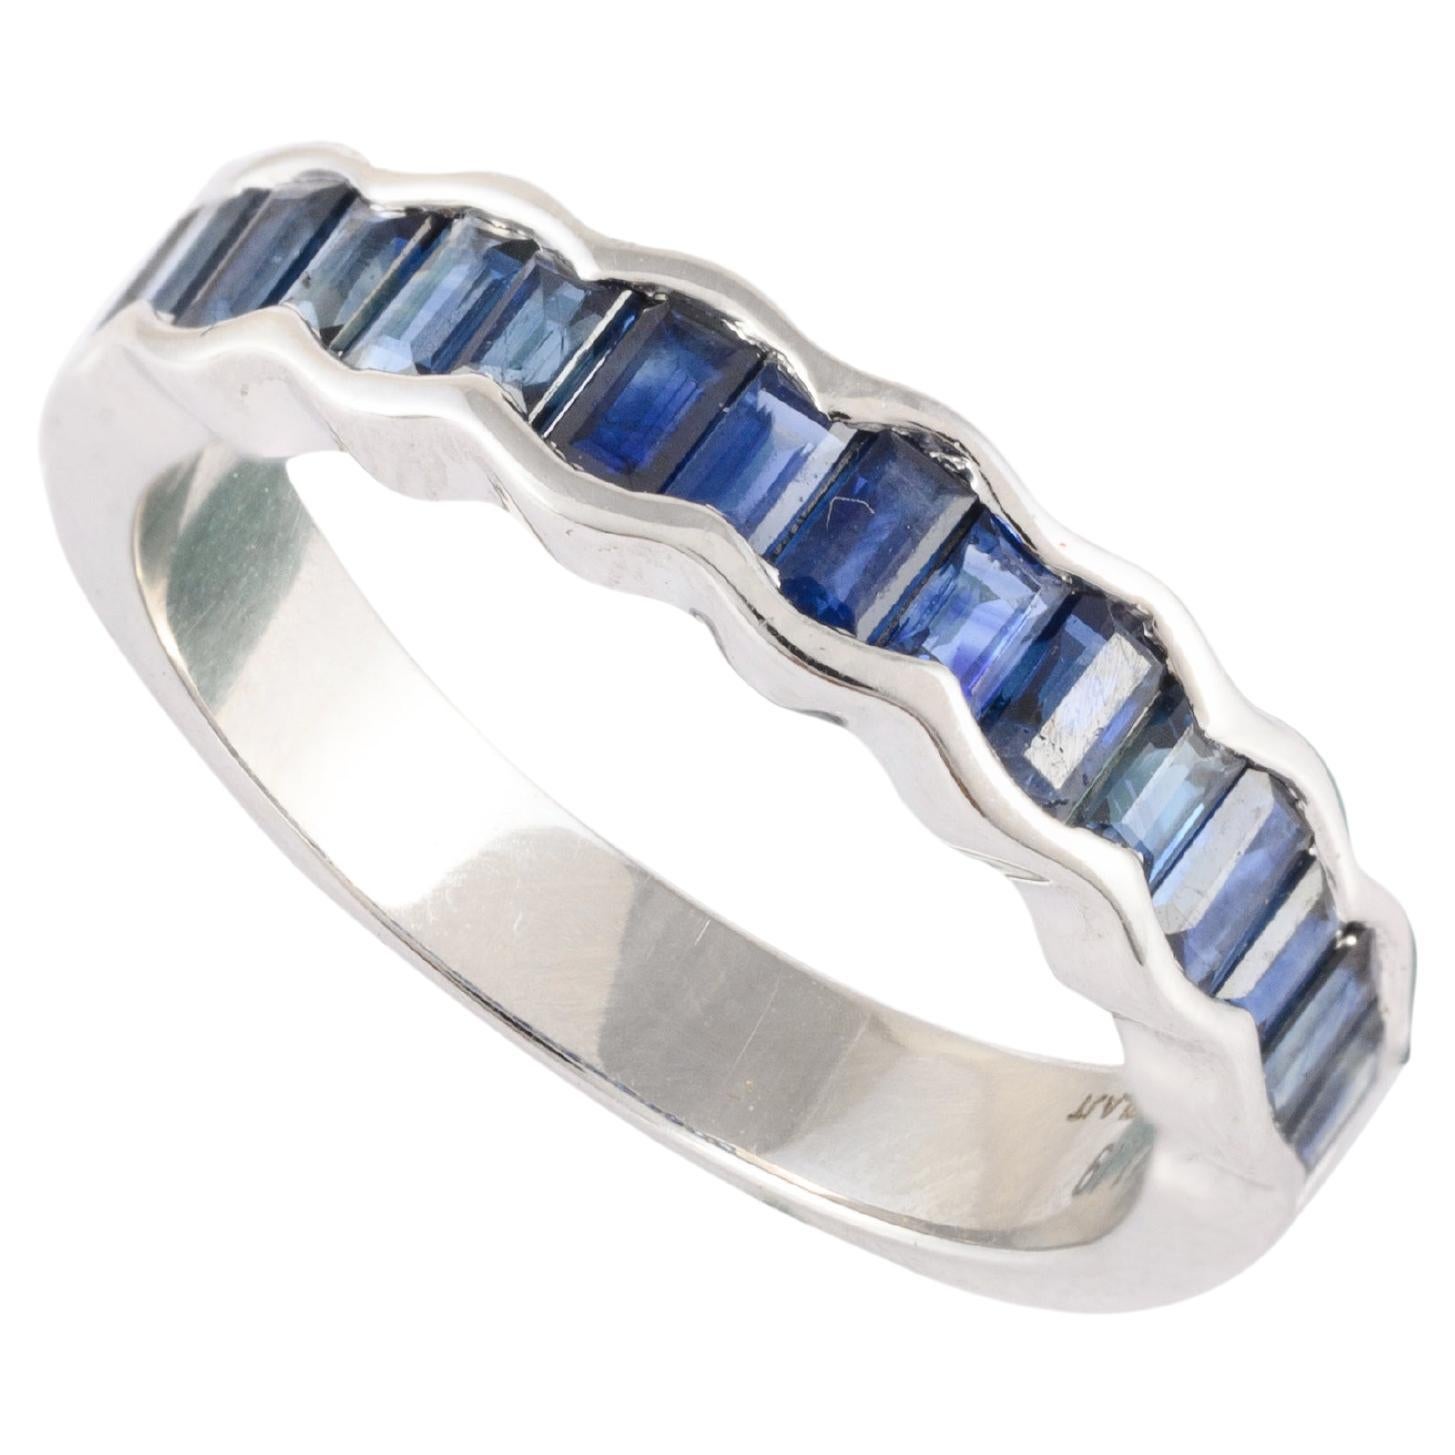 For Sale:  Elegant Stackable Blue Sapphire Gemstone Band Ring in 18k Solid White Gold